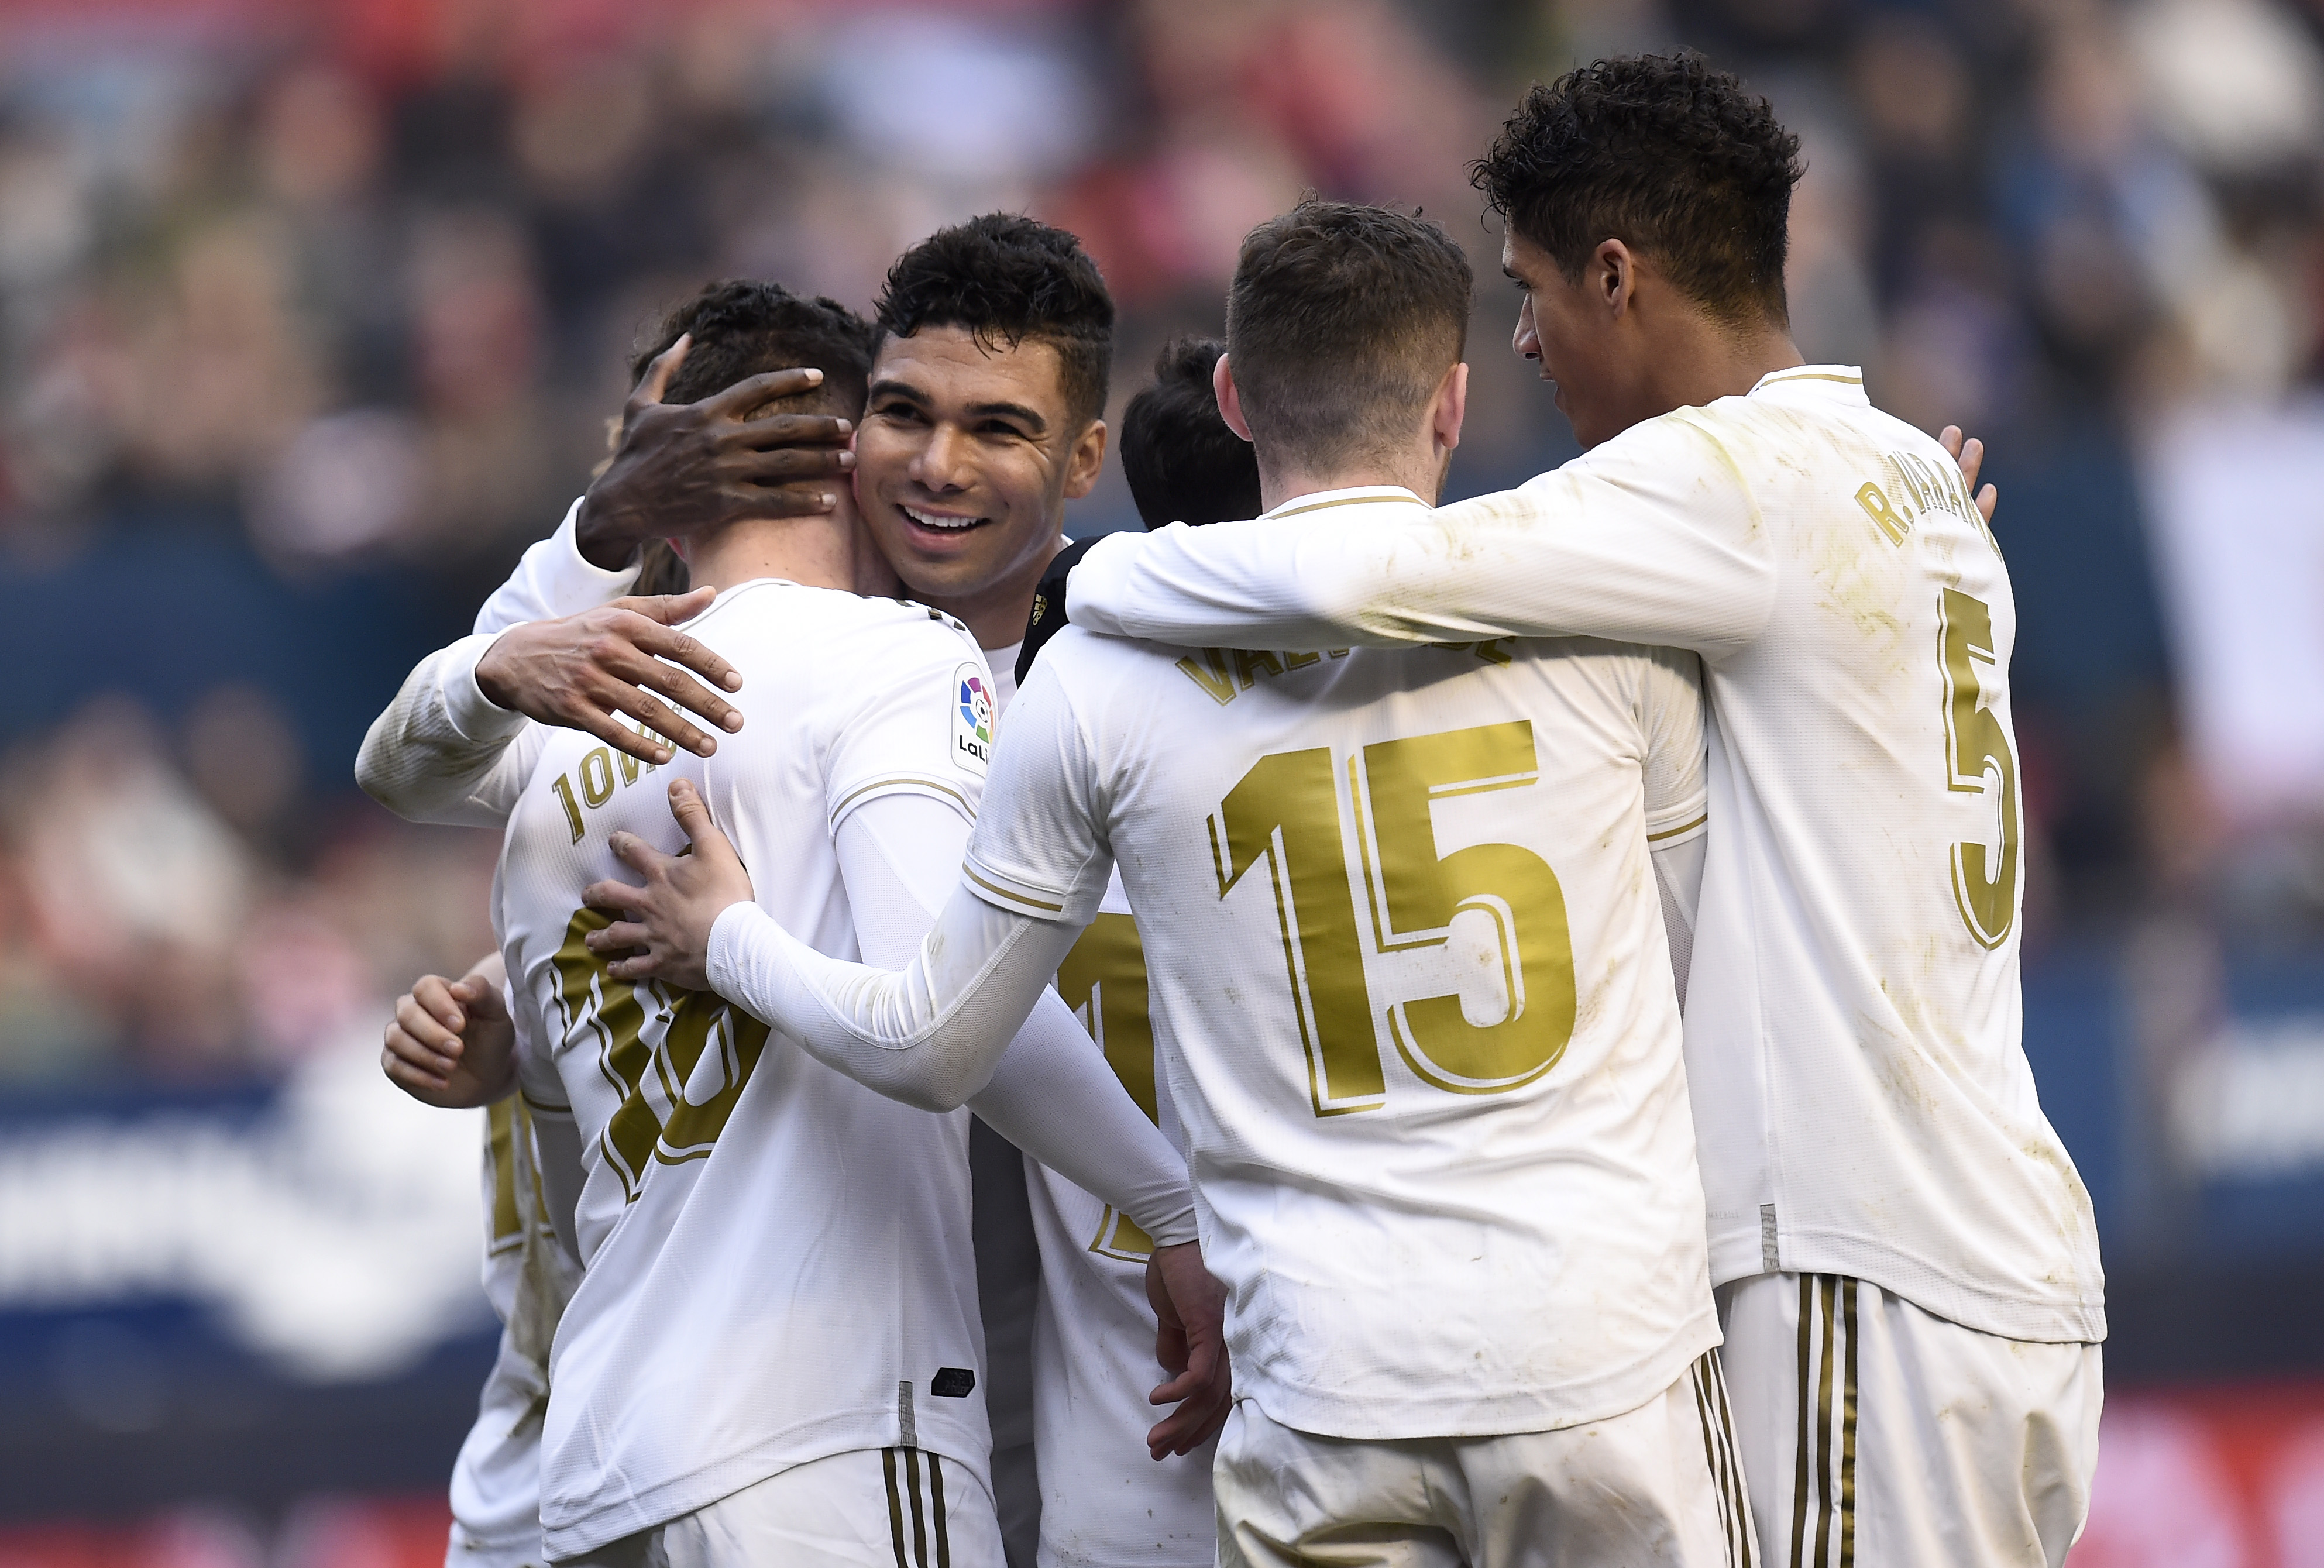 PAMPLONA, SPAIN - FEBRUARY 09: Luka Jovic of Real Madrid celebrates with his team mates after scoring his team's fourth goal during the La Liga match between CA Osasuna and Real Madrid CF at El Sadar Stadium on February 09, 2020 in Pamplona, Spain. (Photo by Juan Manuel Serrano Arce/Getty Images)